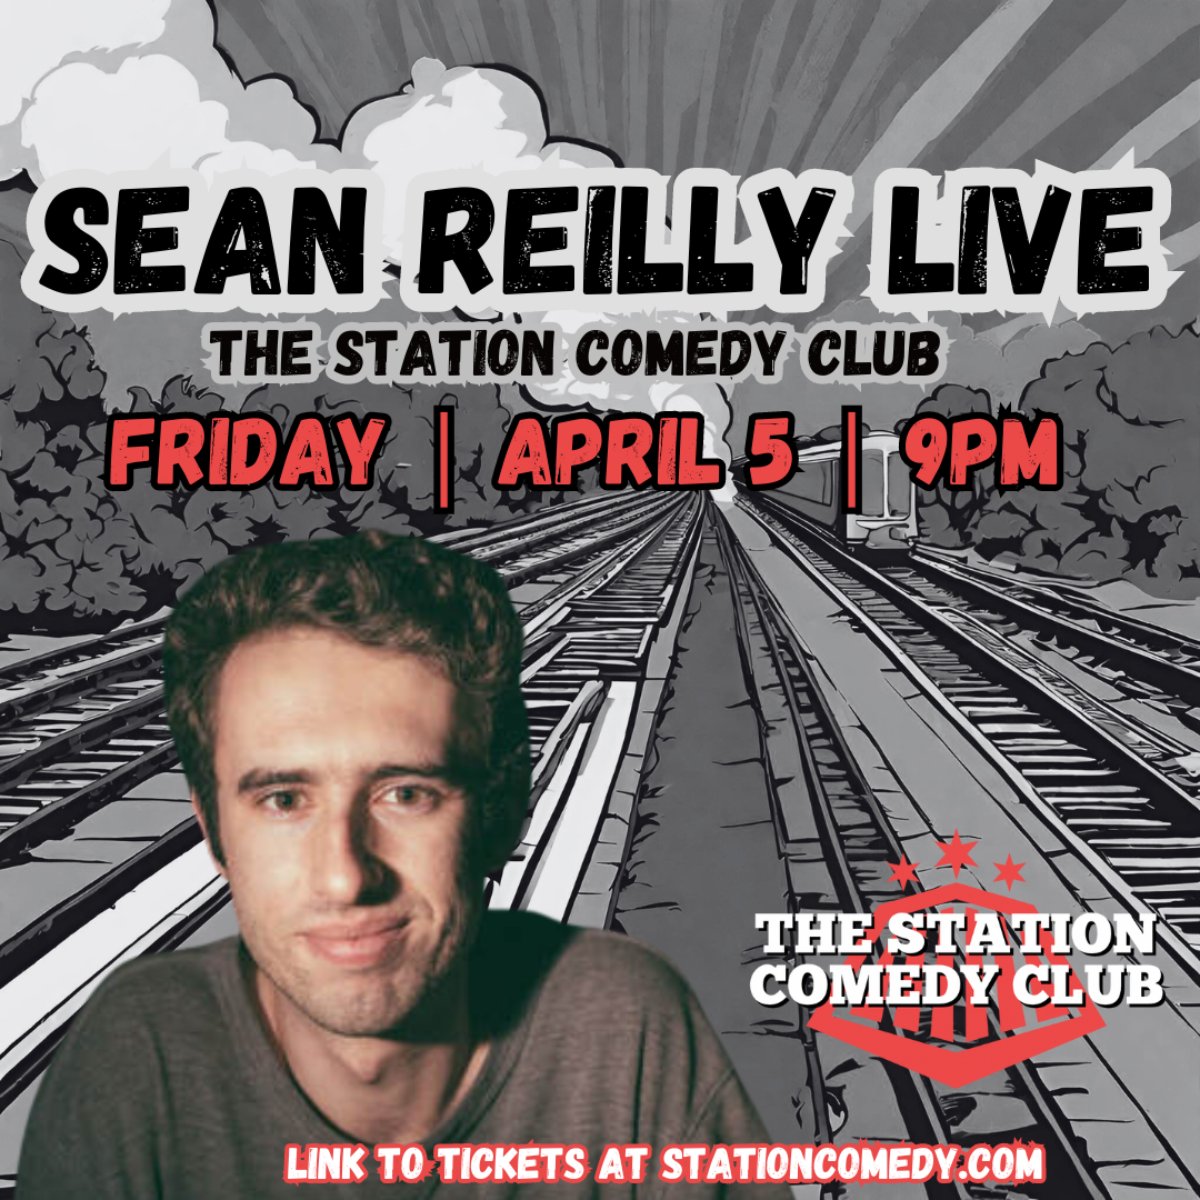 Comedian Sean Reilly is coming back to The Station Comedy Club for one night only on Friday, April 5th at 9 PM! His comedy videos have generated tens of millions of views online, and he hosts a comedy podcast Sean's Show. t.dostuffmedia.com/t/c/s/134819